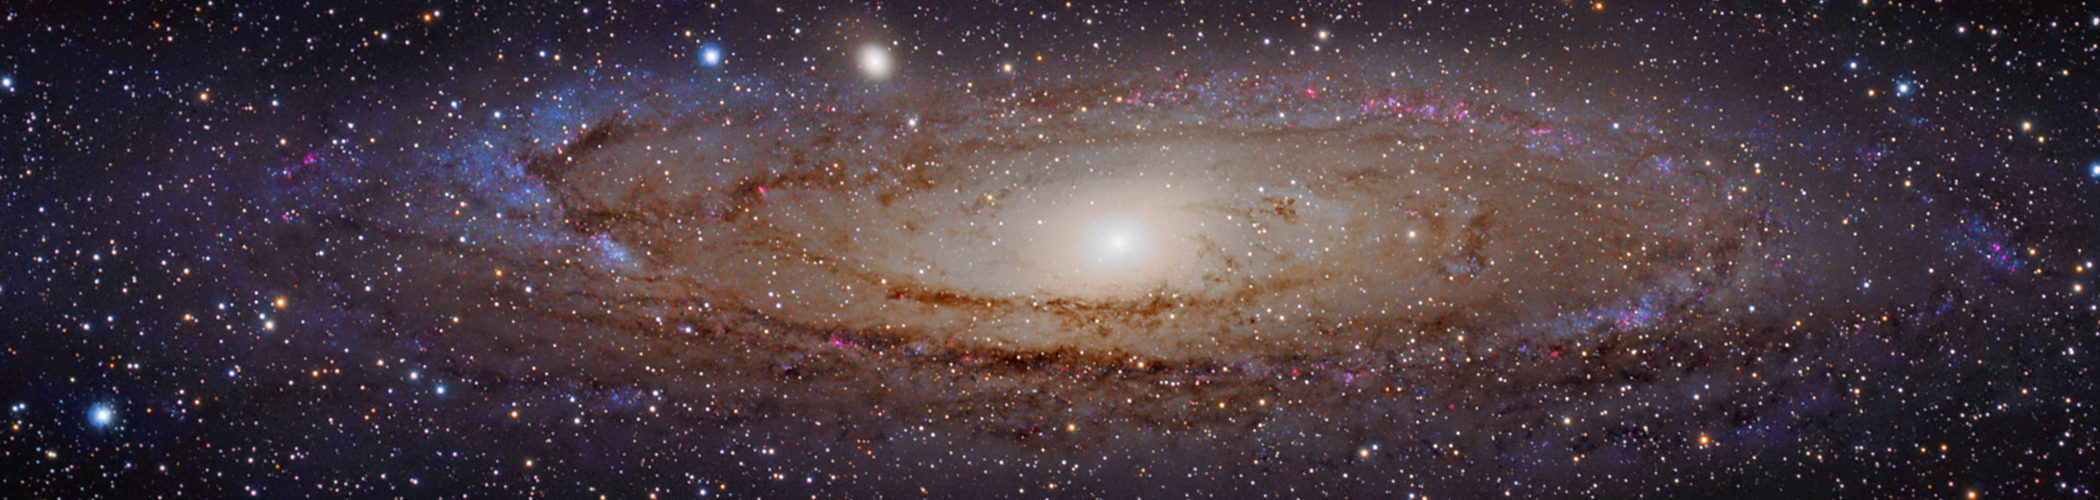 Galaxie d’Andromède (Messier 31)